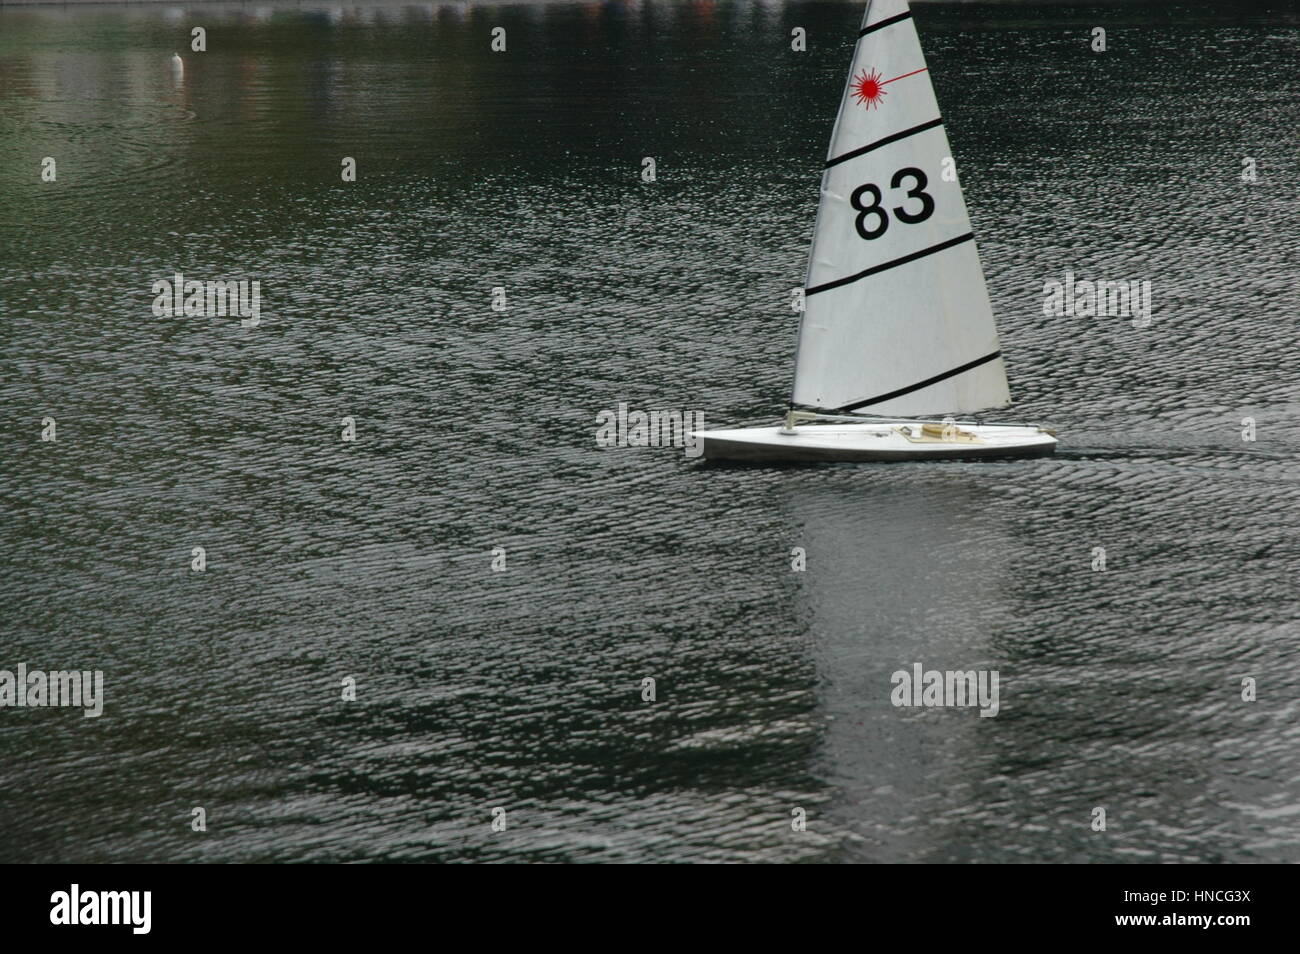 Single remote control sailboat racing in water Stock Photo